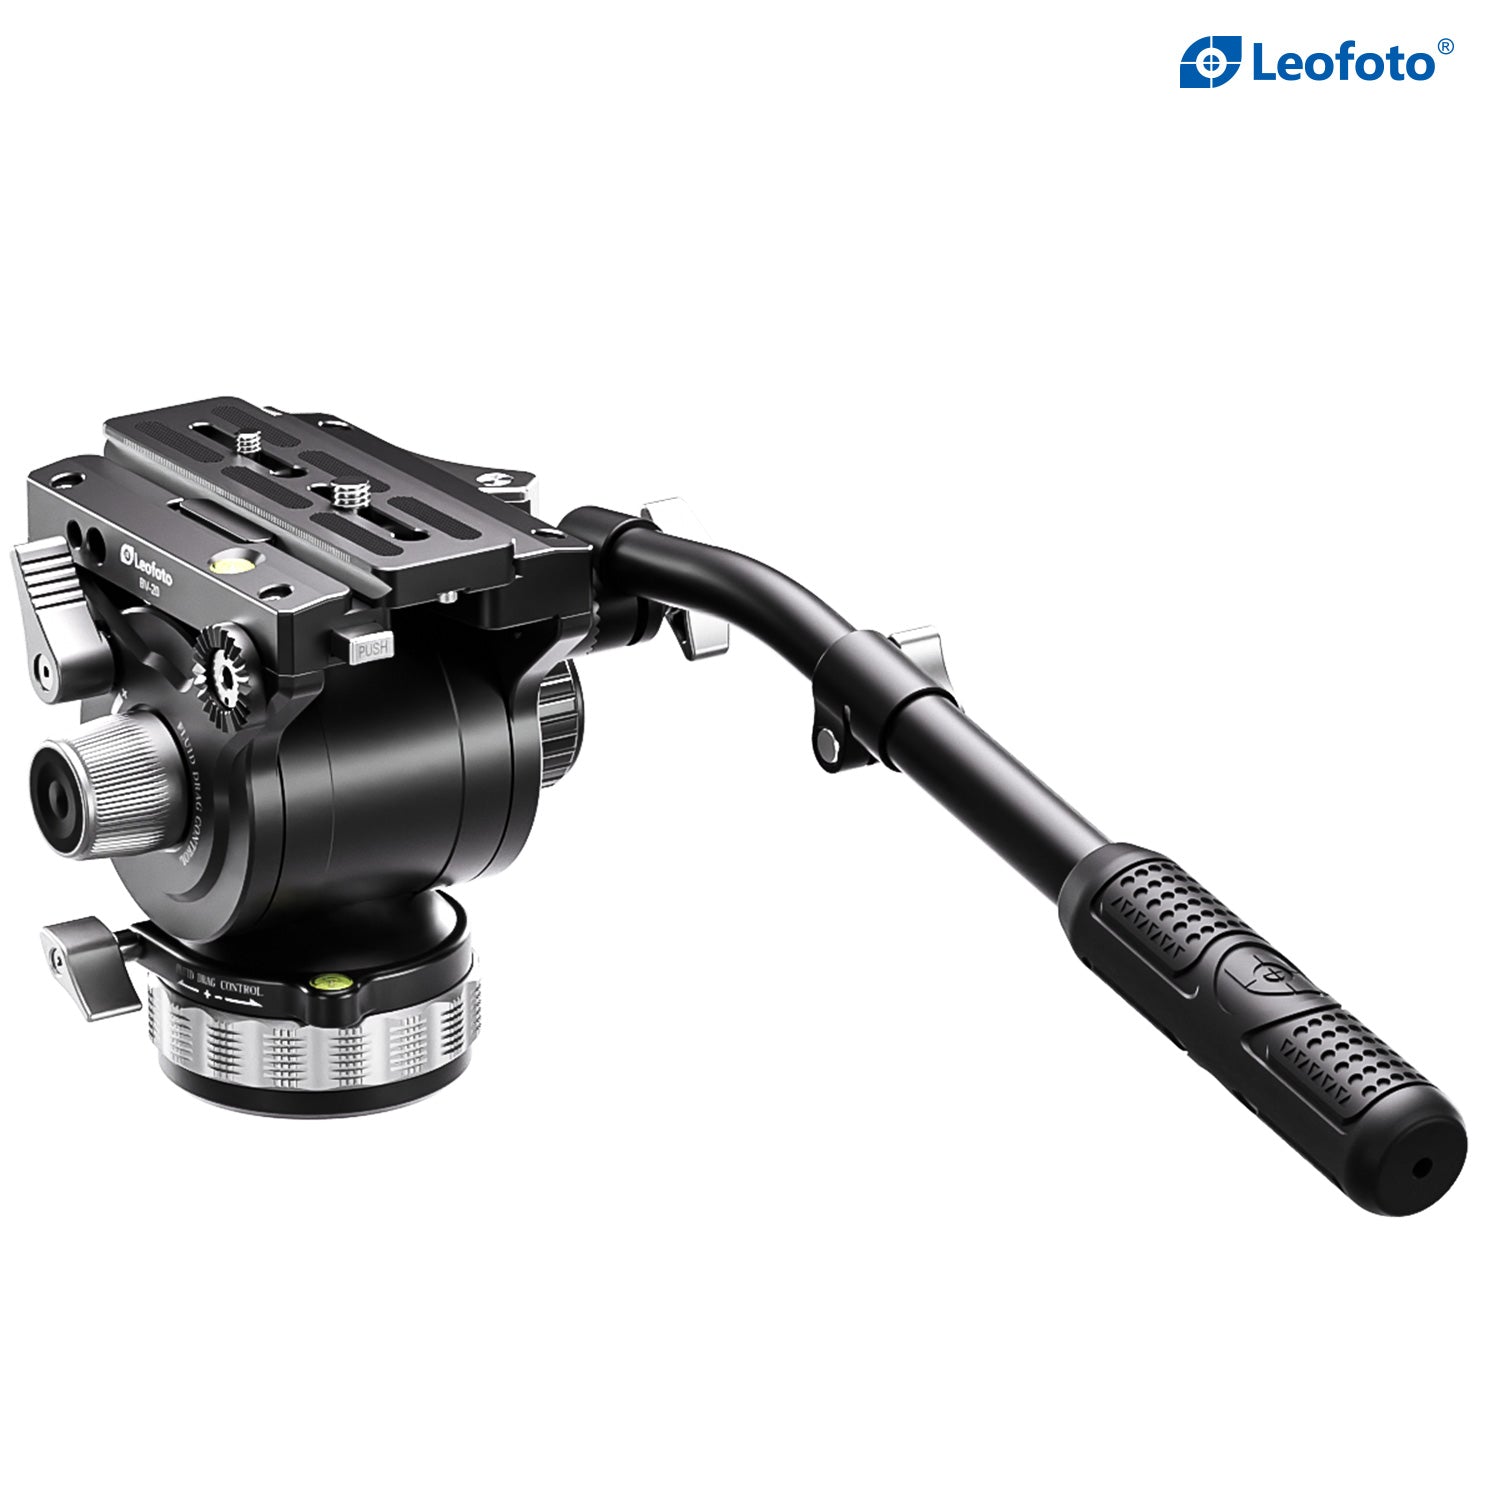 Leofoto LVC-253C+BV-20 (Lever-Release Clamp) Dual-Tube Video Tripod with Fluid Head Set  | 75mm Integrated Bowl with Leveling Base and Handle